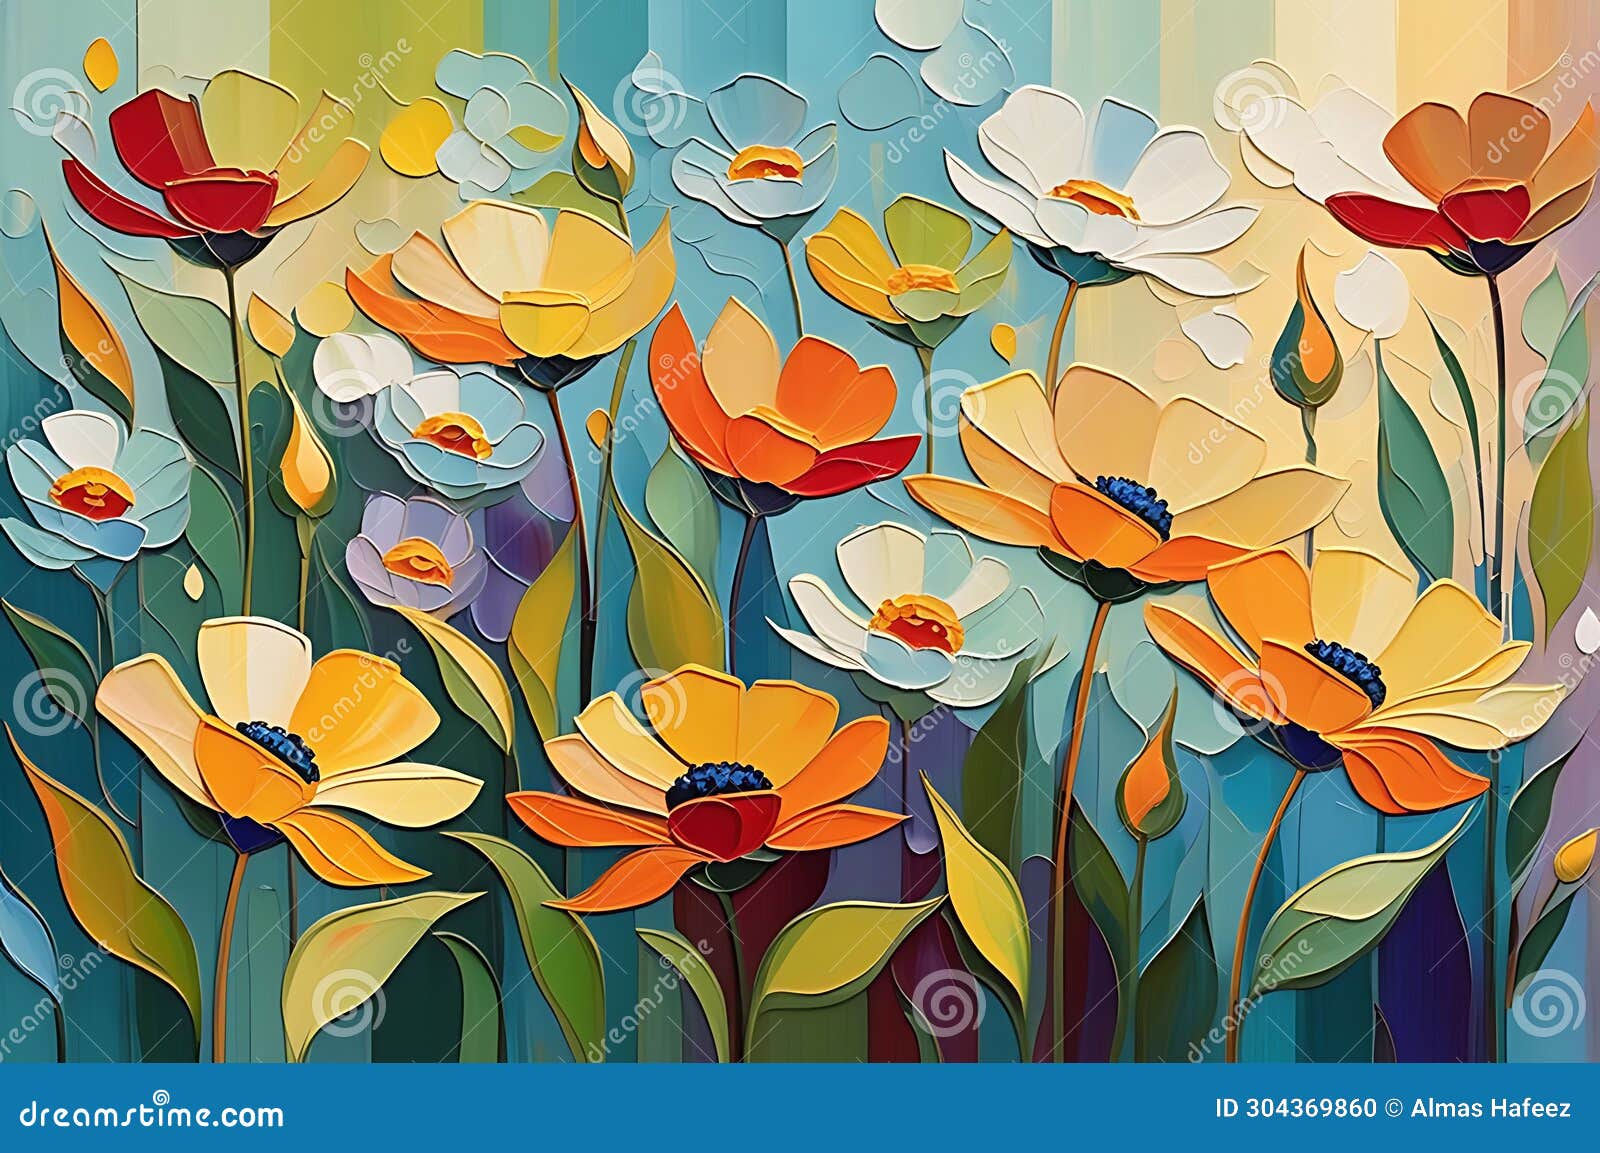 abstract painting - focus on a myriad of flowers in undefined s, blending into a cohesive background